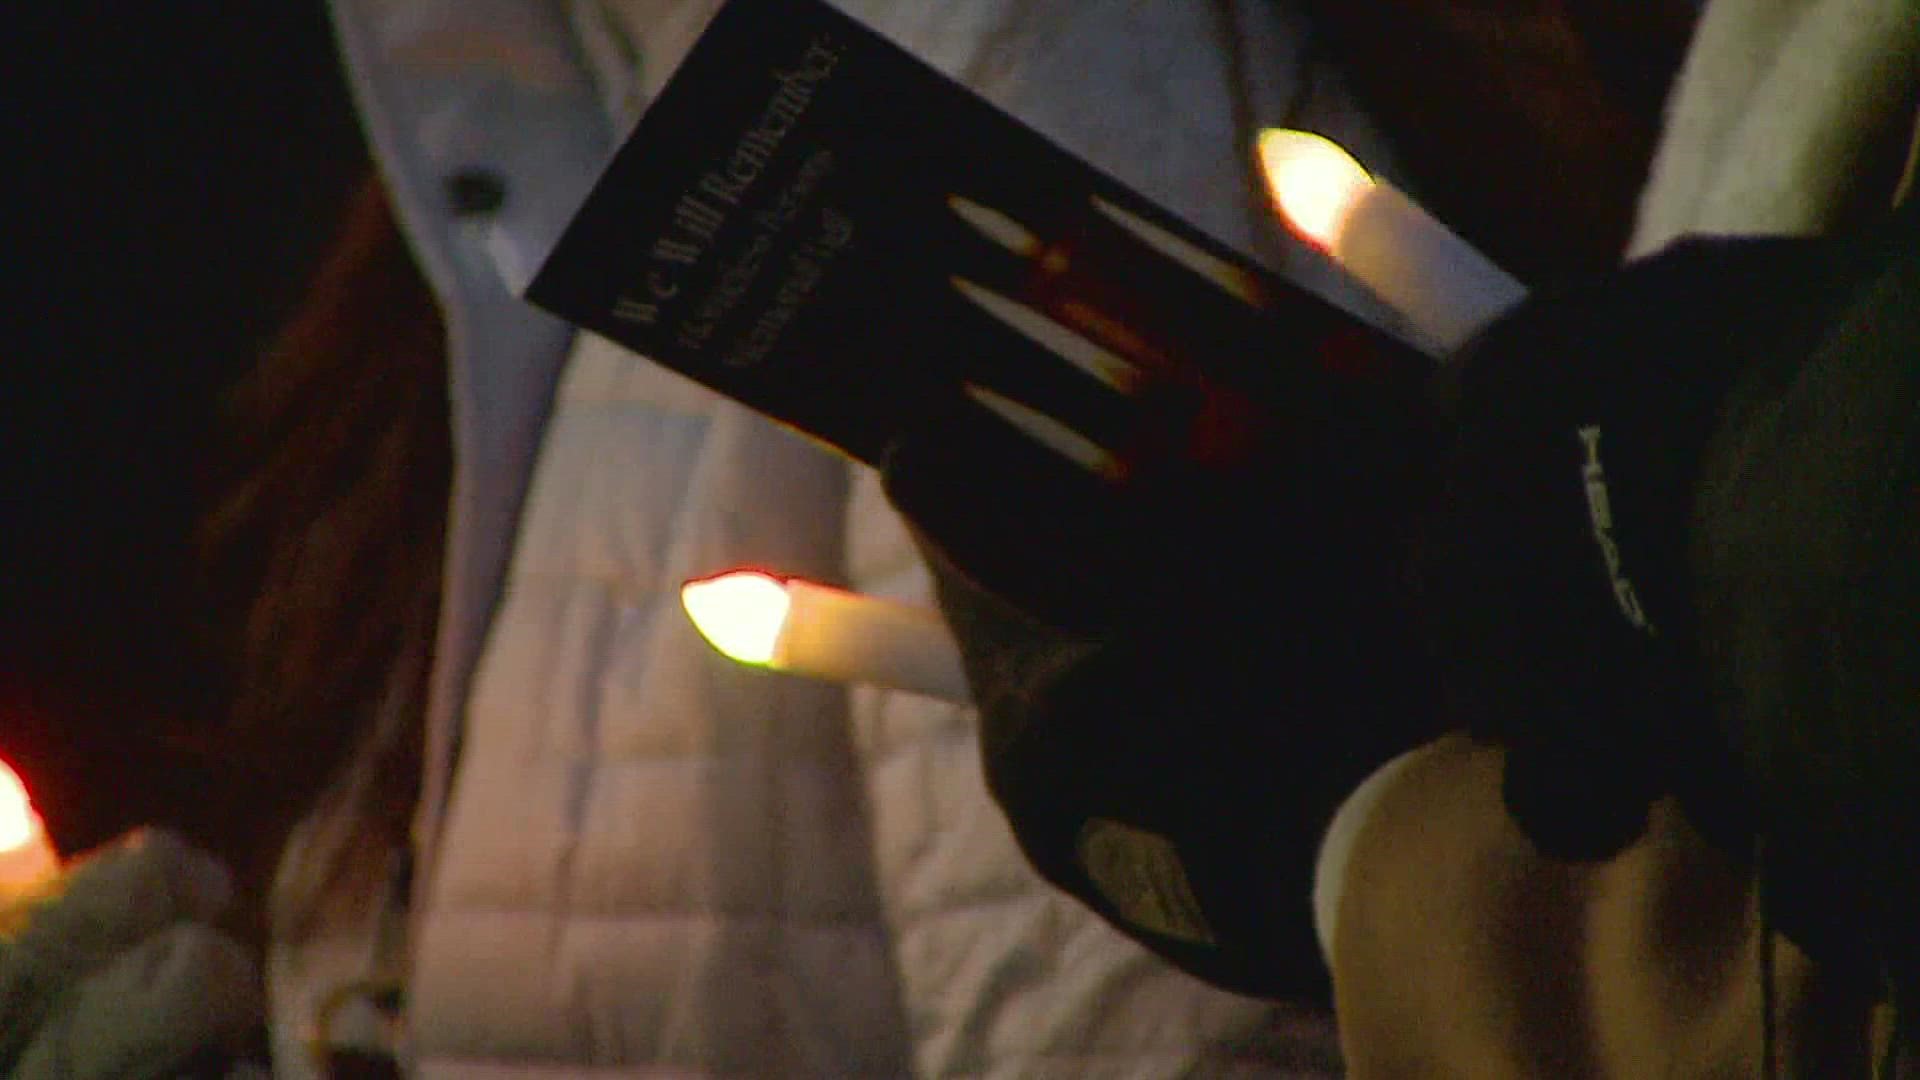 On the longest, coldest night of the year, a vigil was held to remember homeless persons who died on the streets of metro Denver.